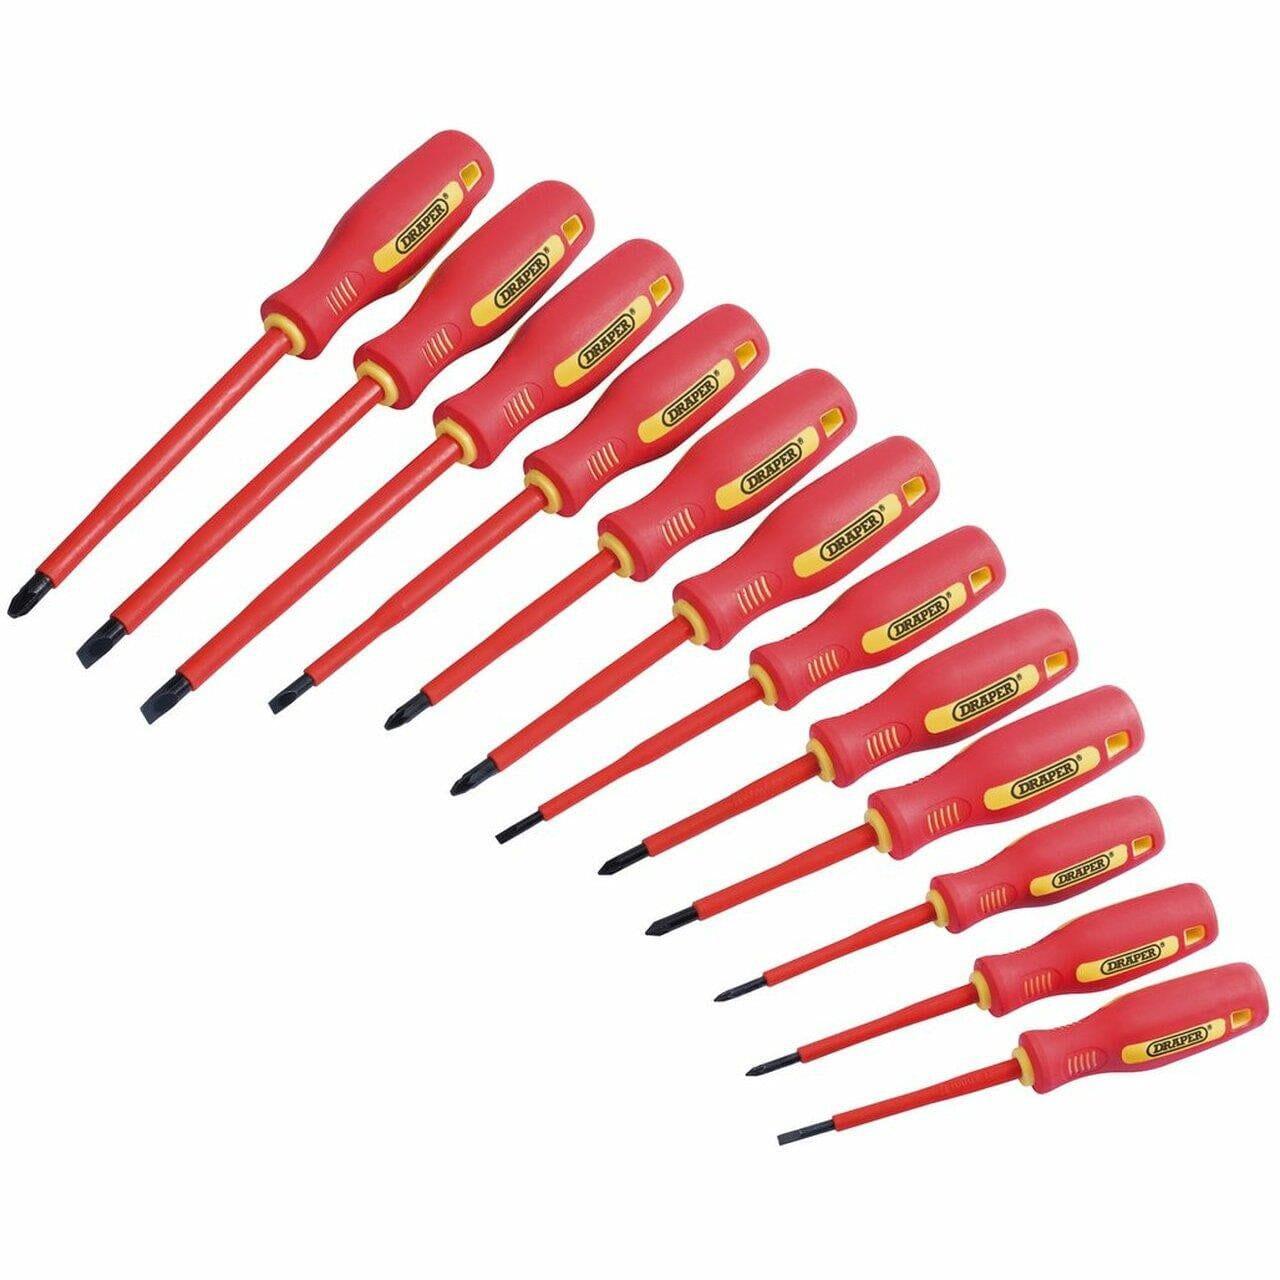 Draper 12pc Fully Insulated VDE Electricians Screwdriver Set 46541 - Tools 2U Direct SW